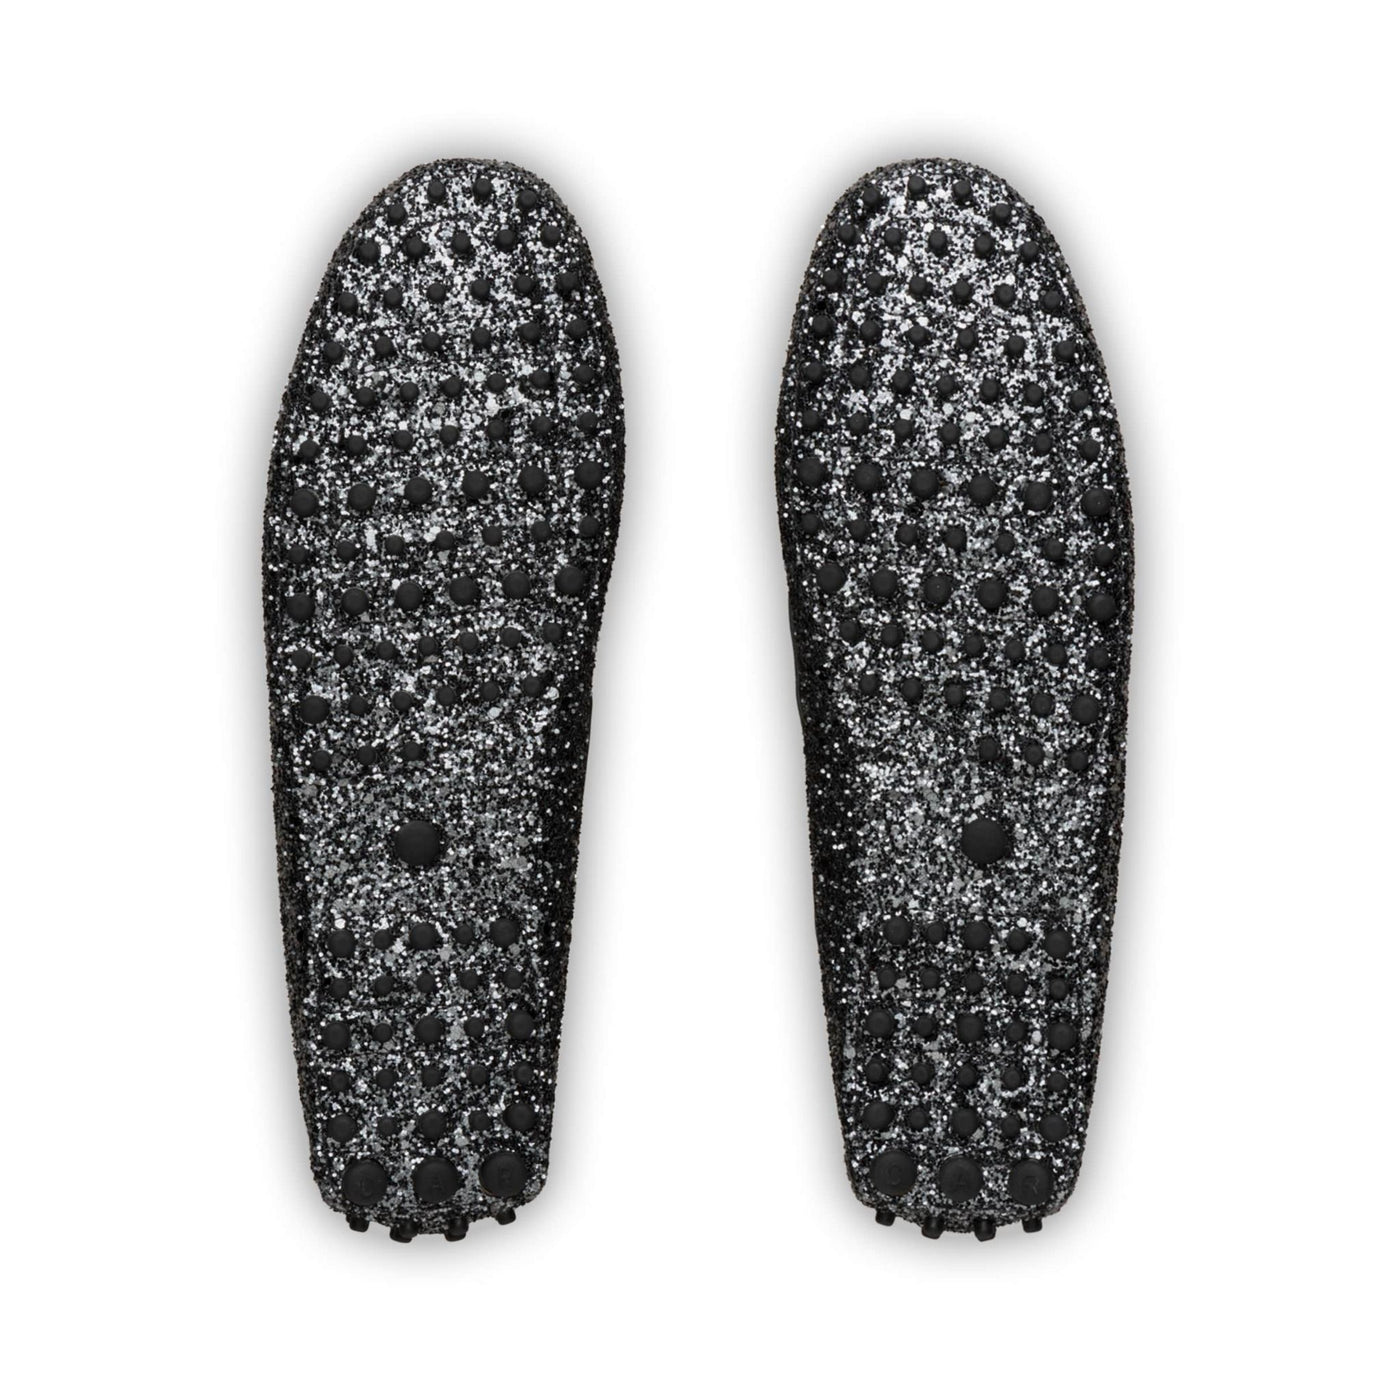 Women's glittery leather moccasin